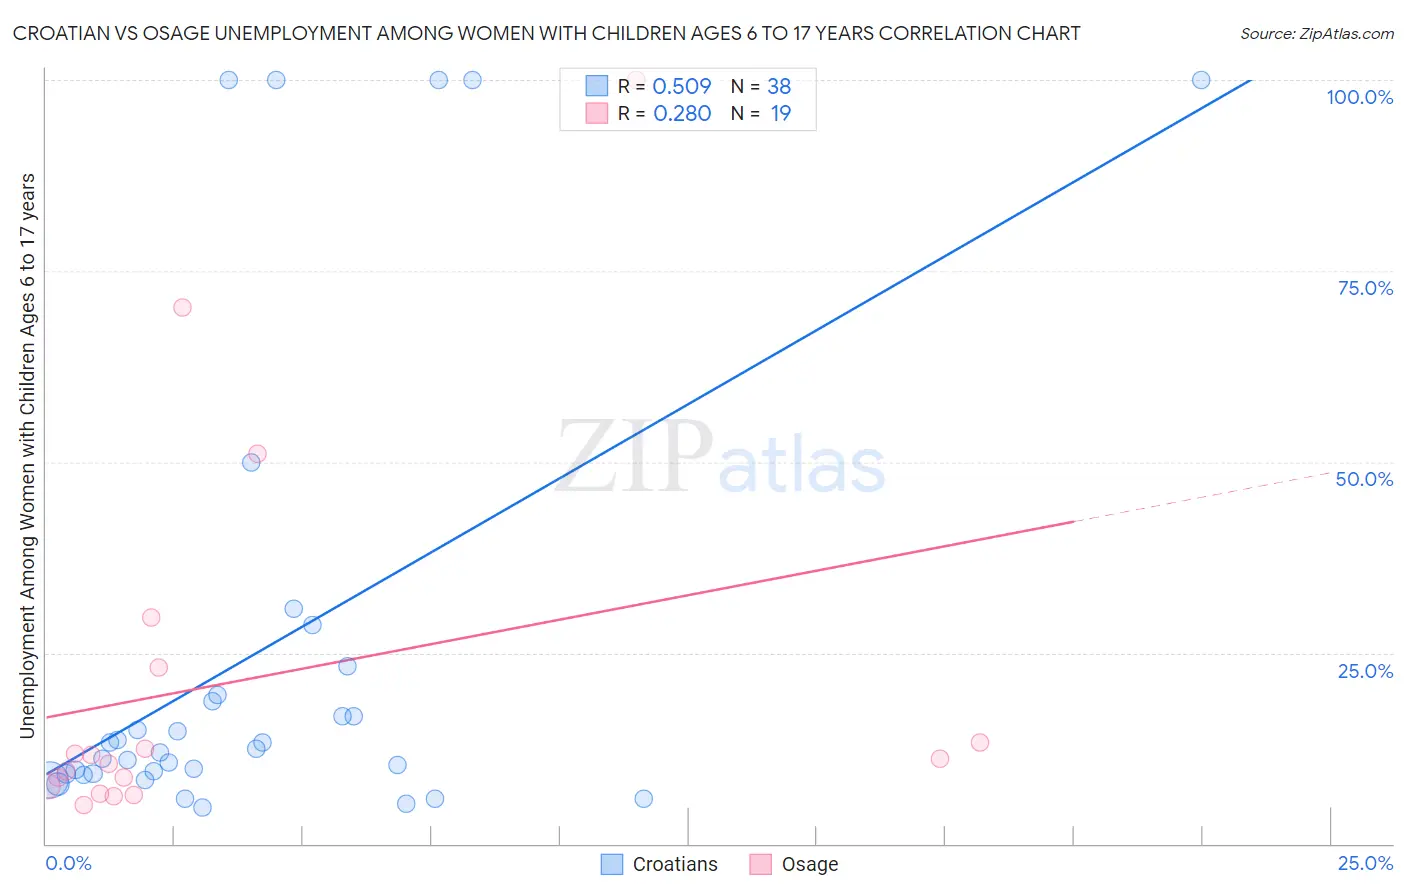 Croatian vs Osage Unemployment Among Women with Children Ages 6 to 17 years